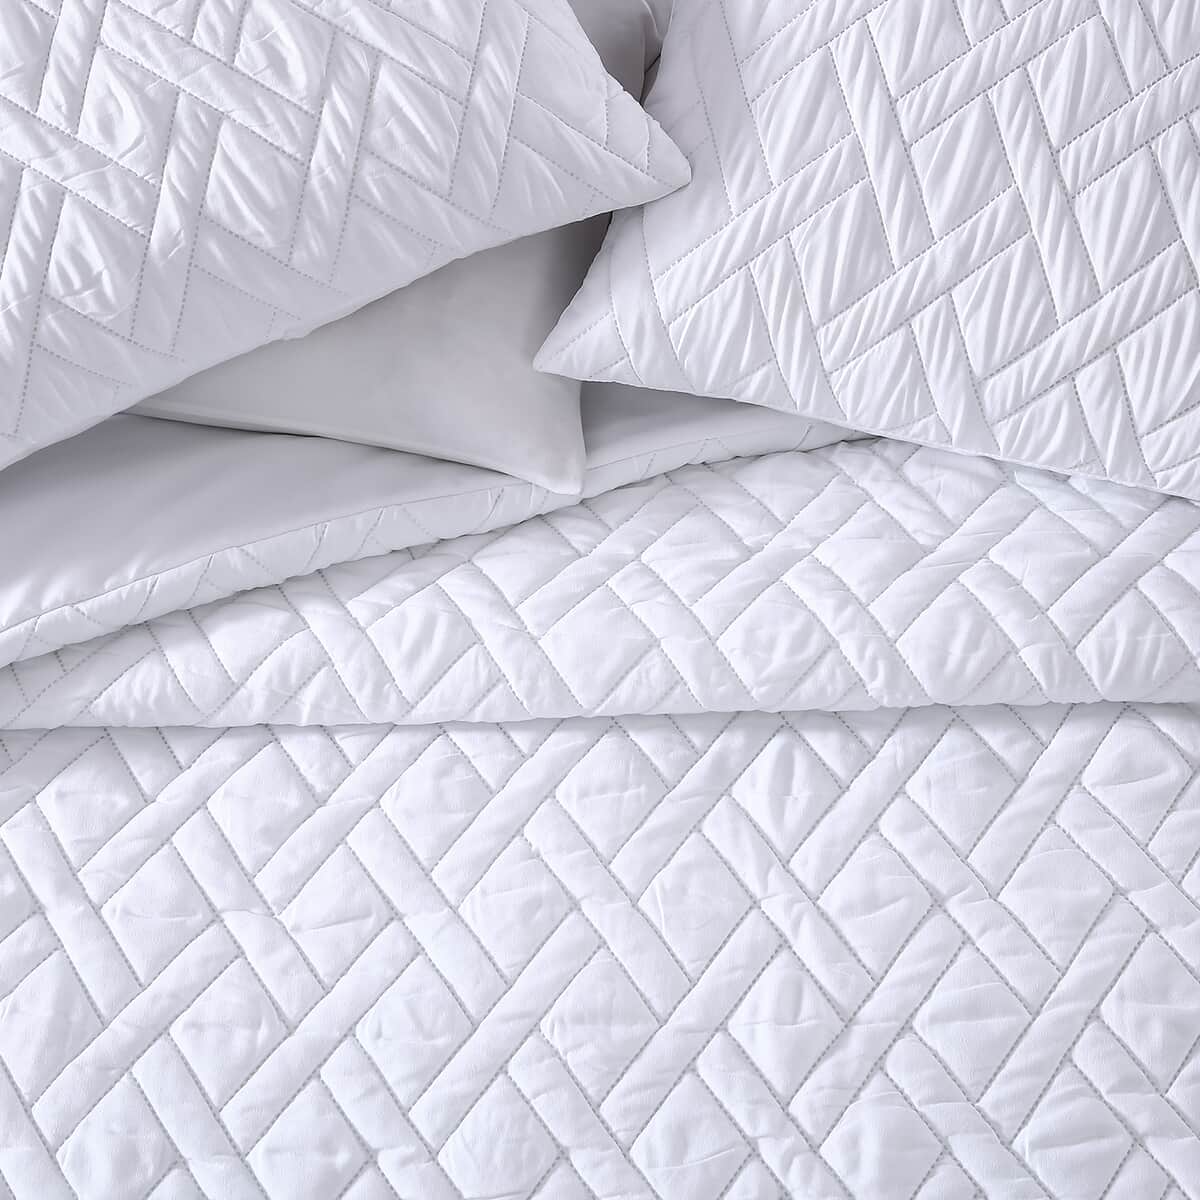 The Nesting Company- Larch 3 Piece Comforter Set - Queen (White) , Bed Comforters , Polyester Comforter , Bedding Sets , Quilt Set image number 5